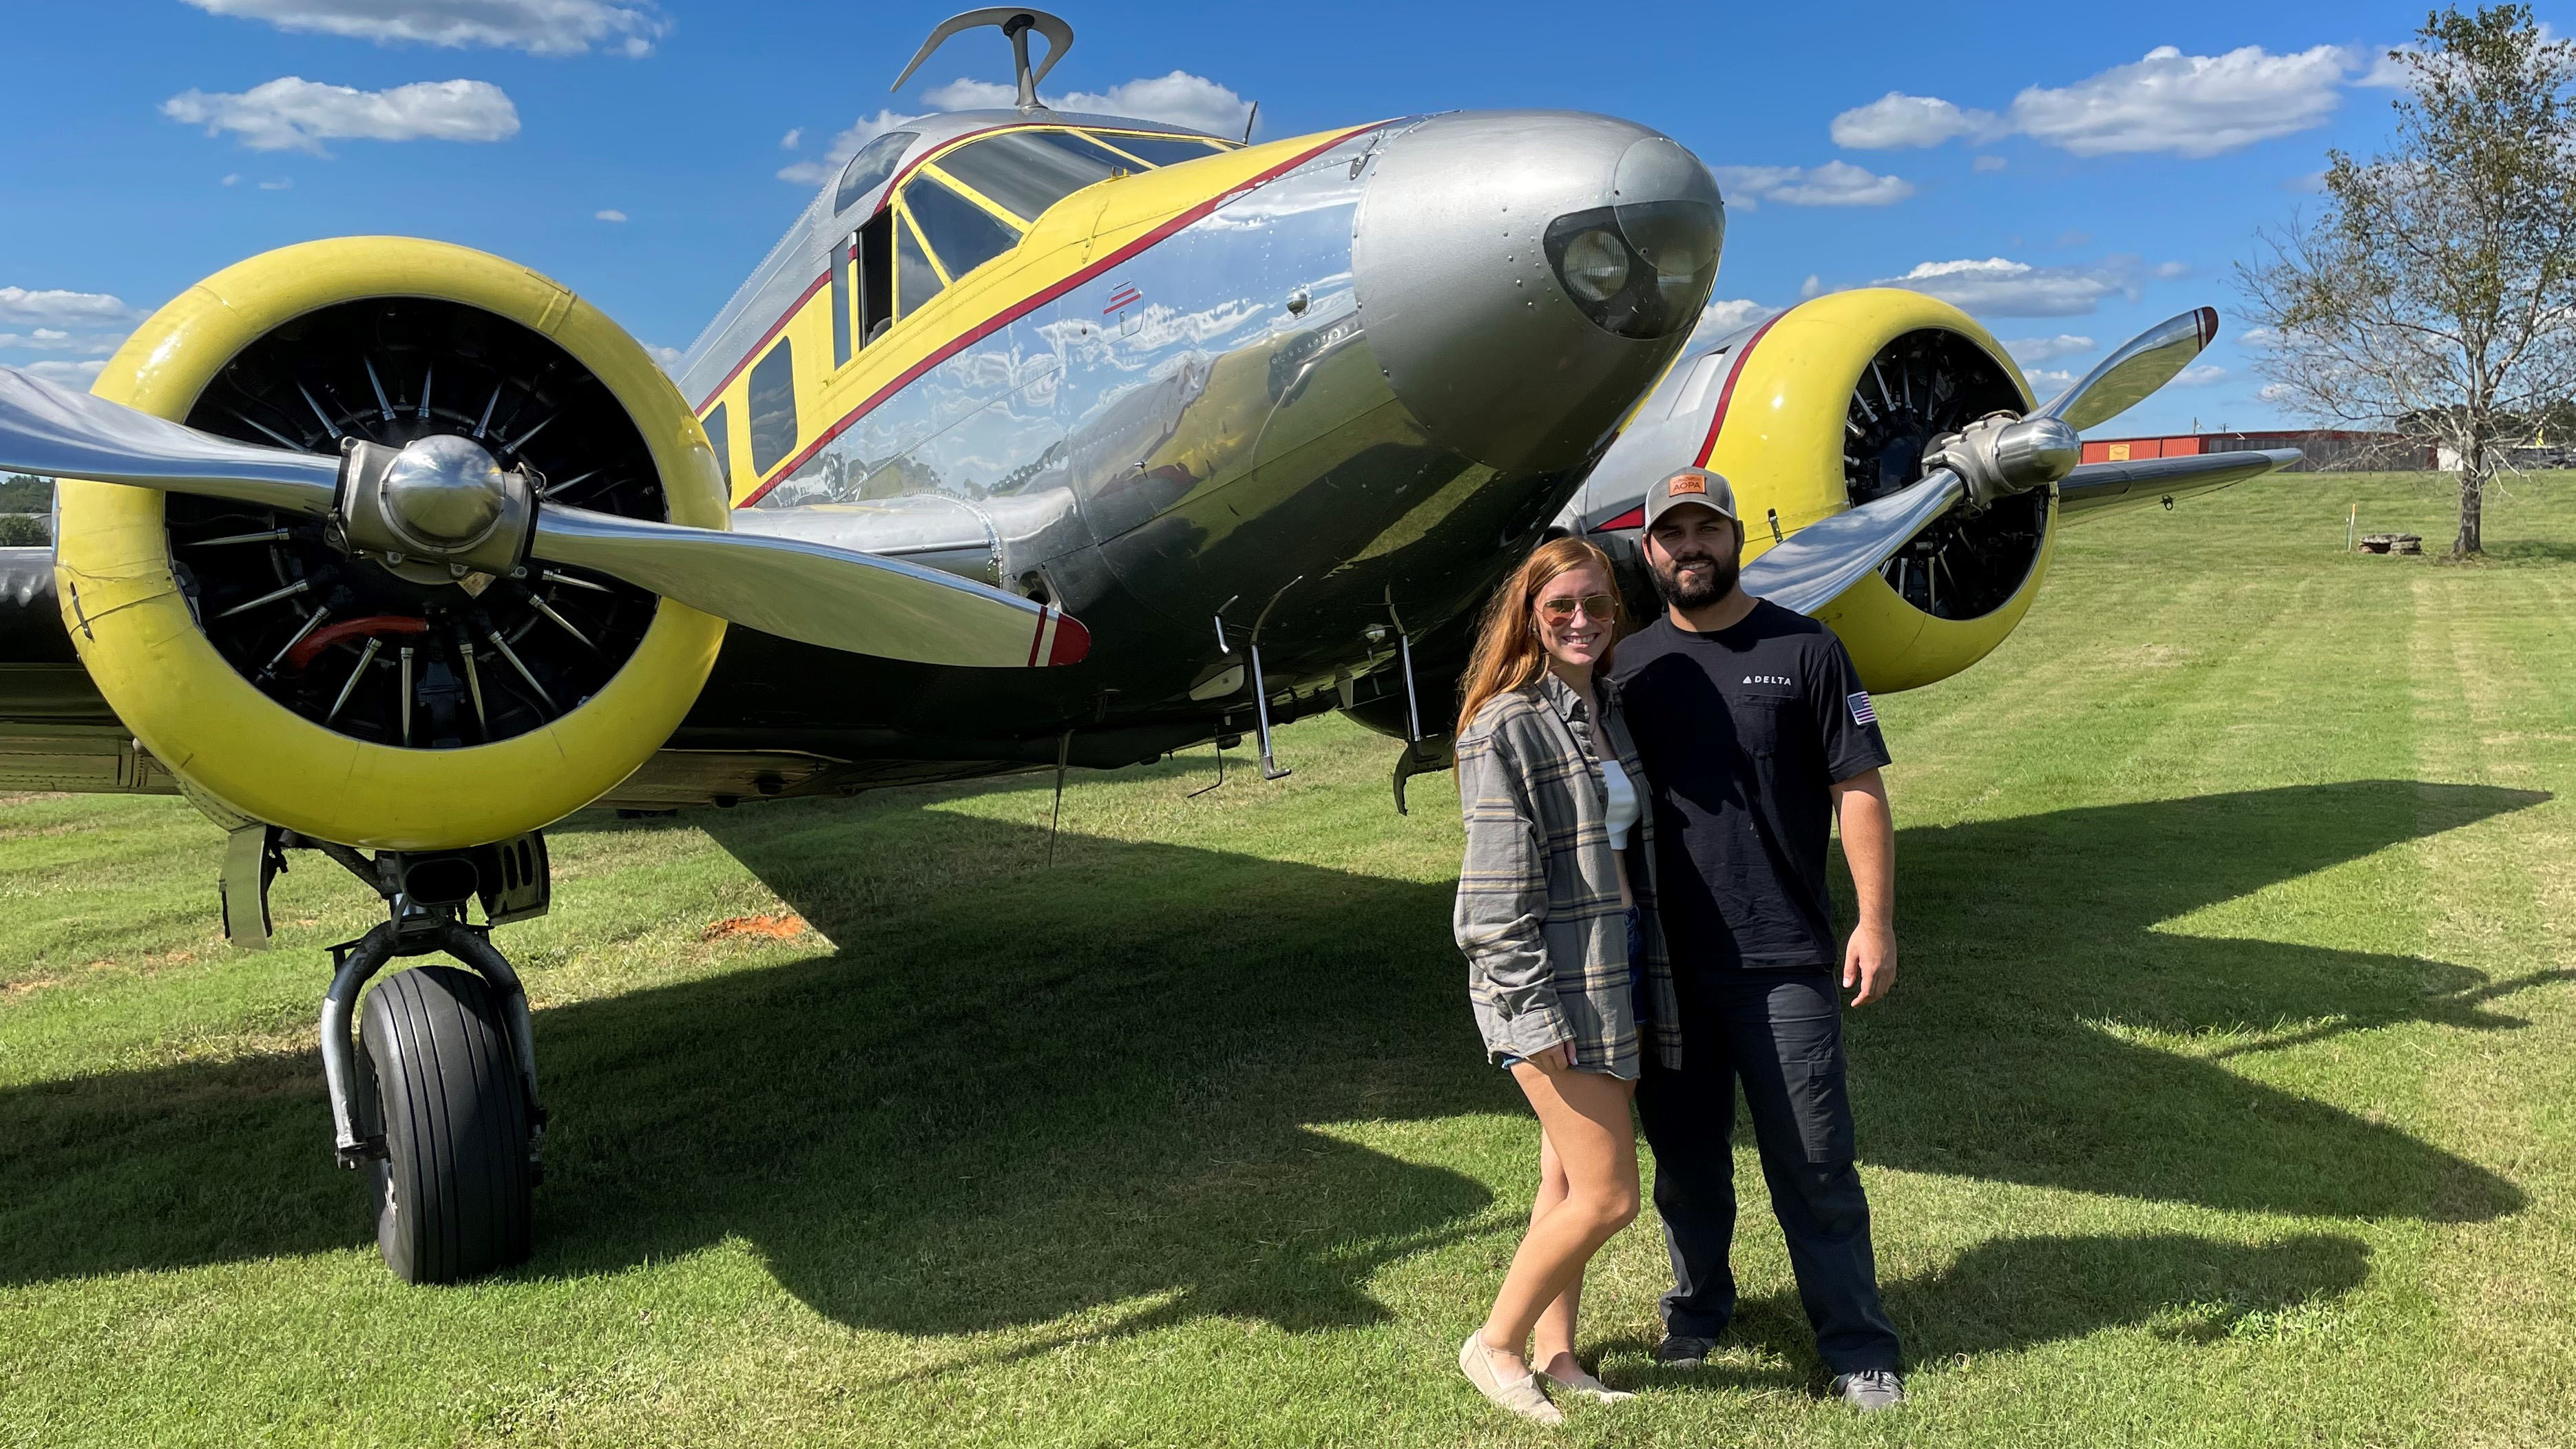 Young aviators Madison Murray and Christian Campbell flew a borrowed Beech 18 from Georgia to Tullahoma, Tennessee, for the annual Beech Party Fly-In. Photo courtesy of Madison Murray. 